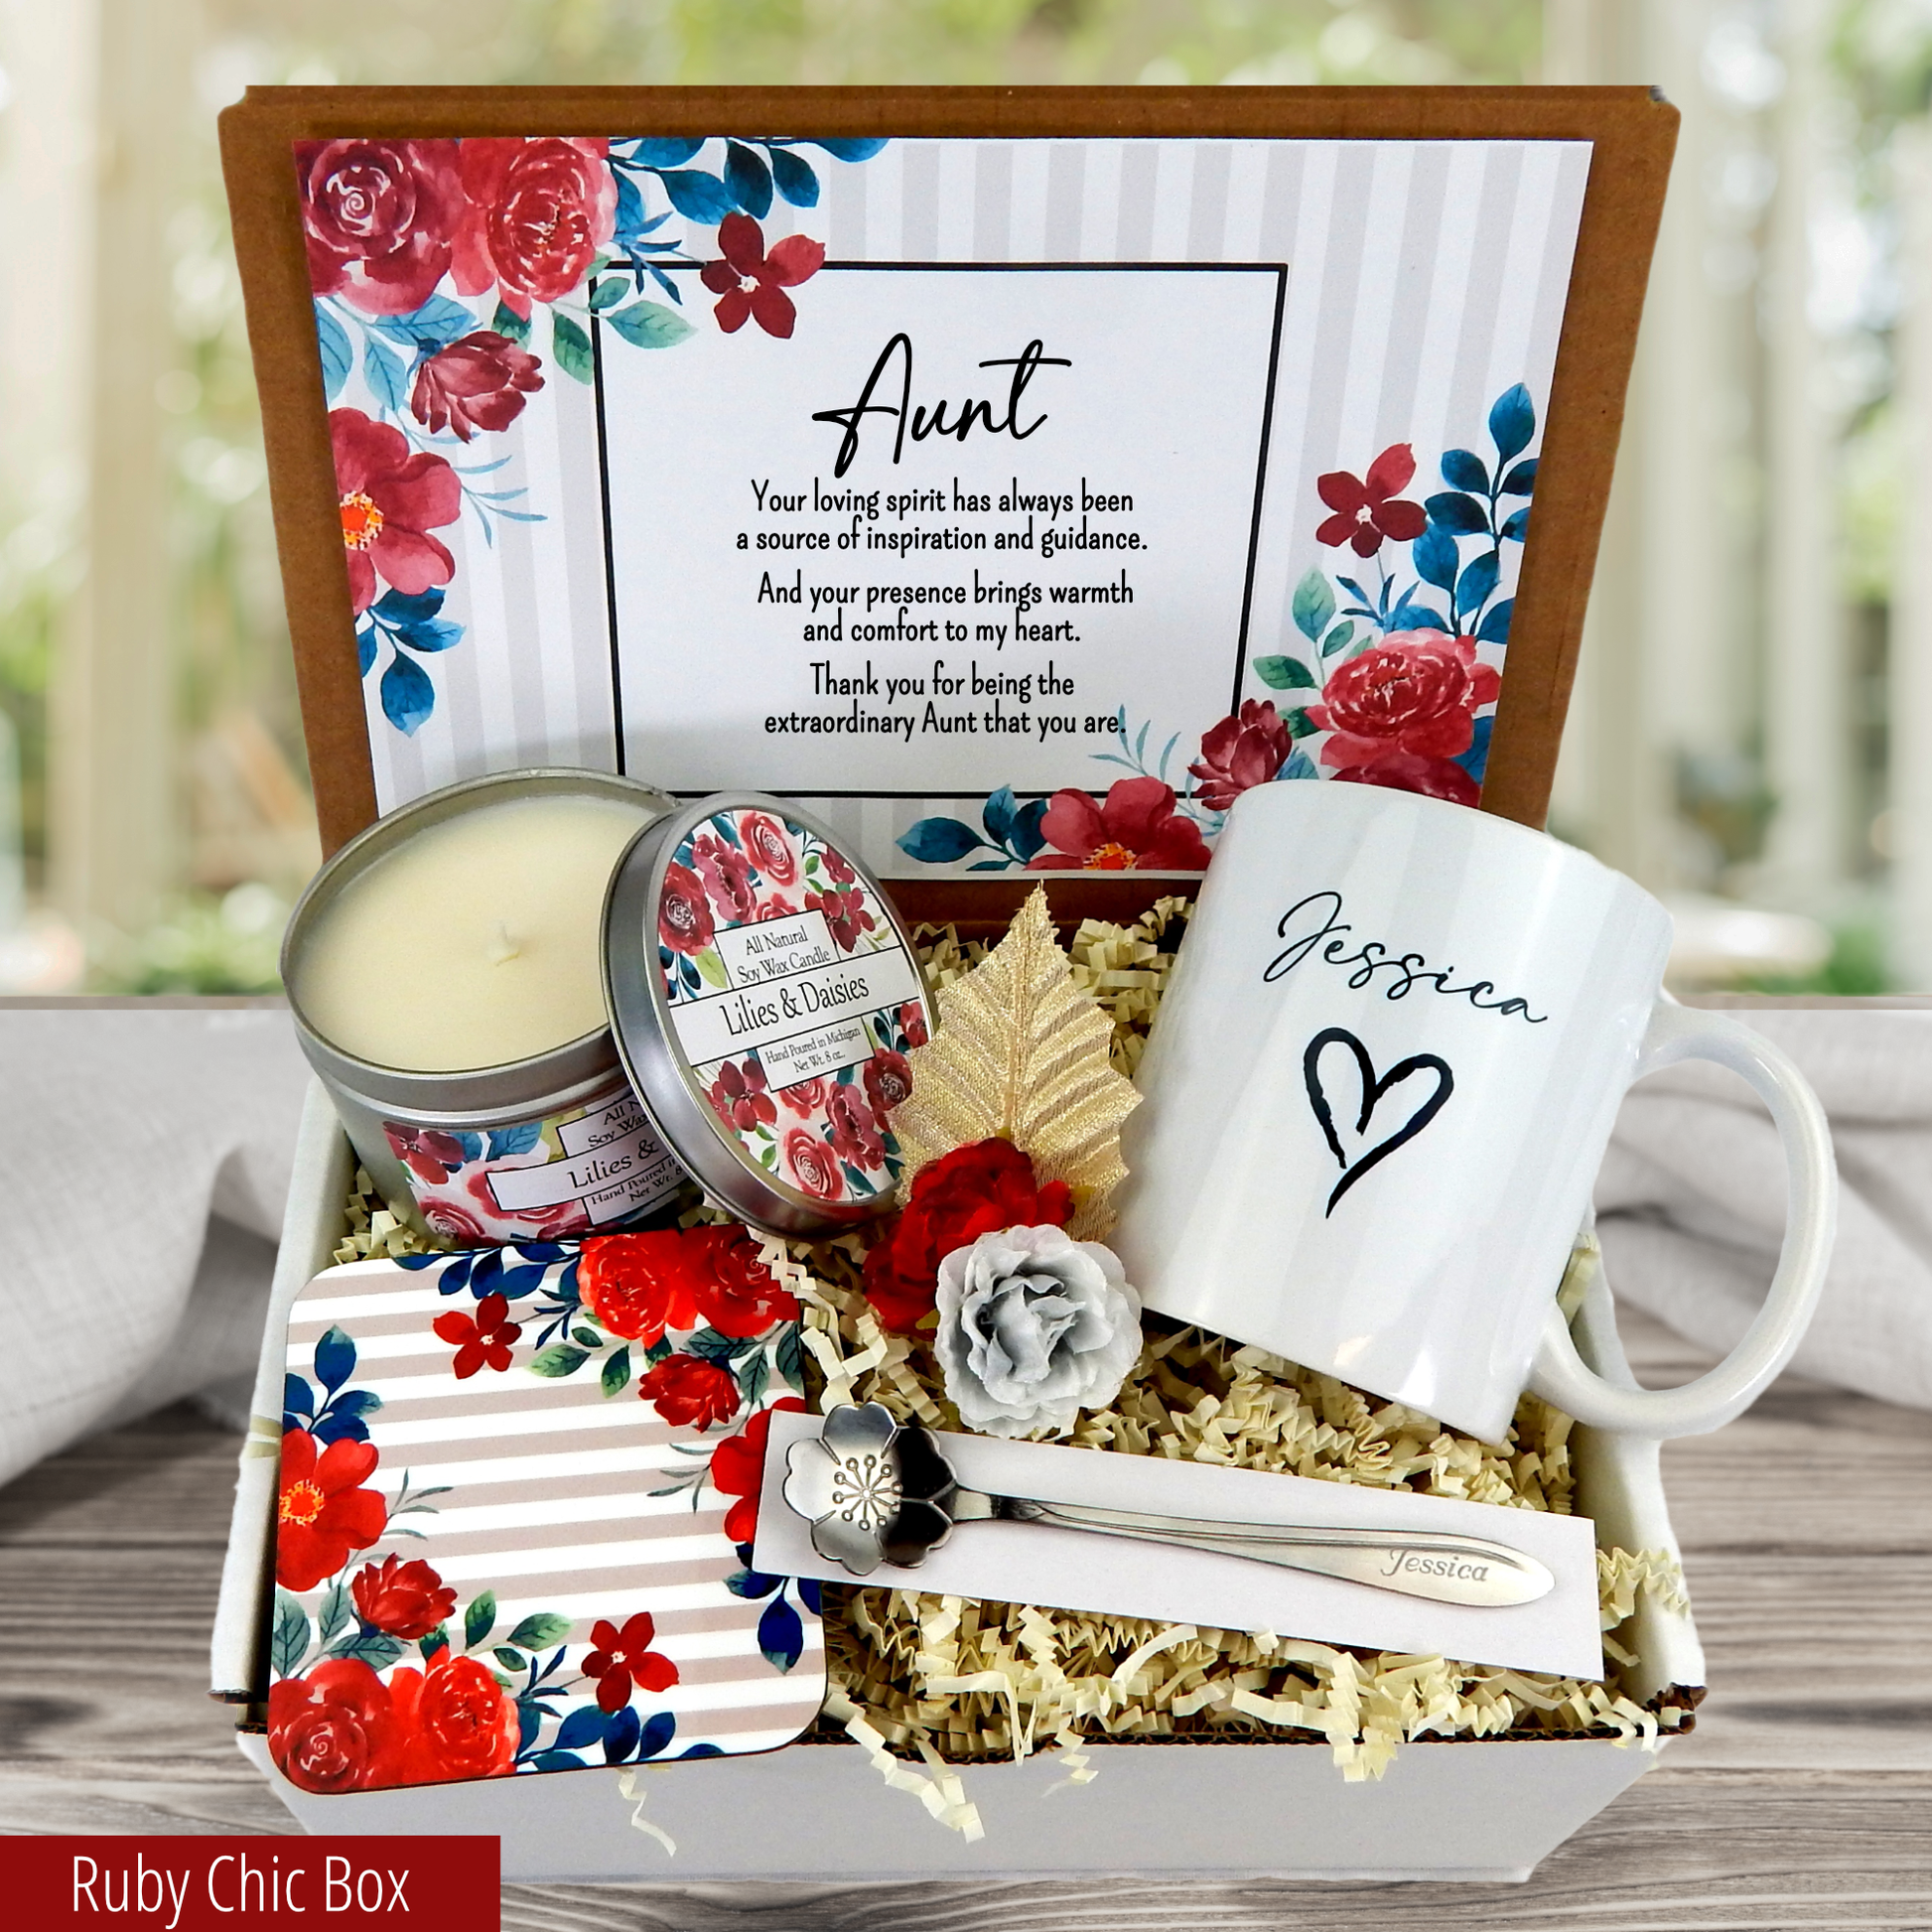 A Heartfelt Celebration: Customized Mug, Engraved Spoon, and Candle in an Aunt's Gift Basket